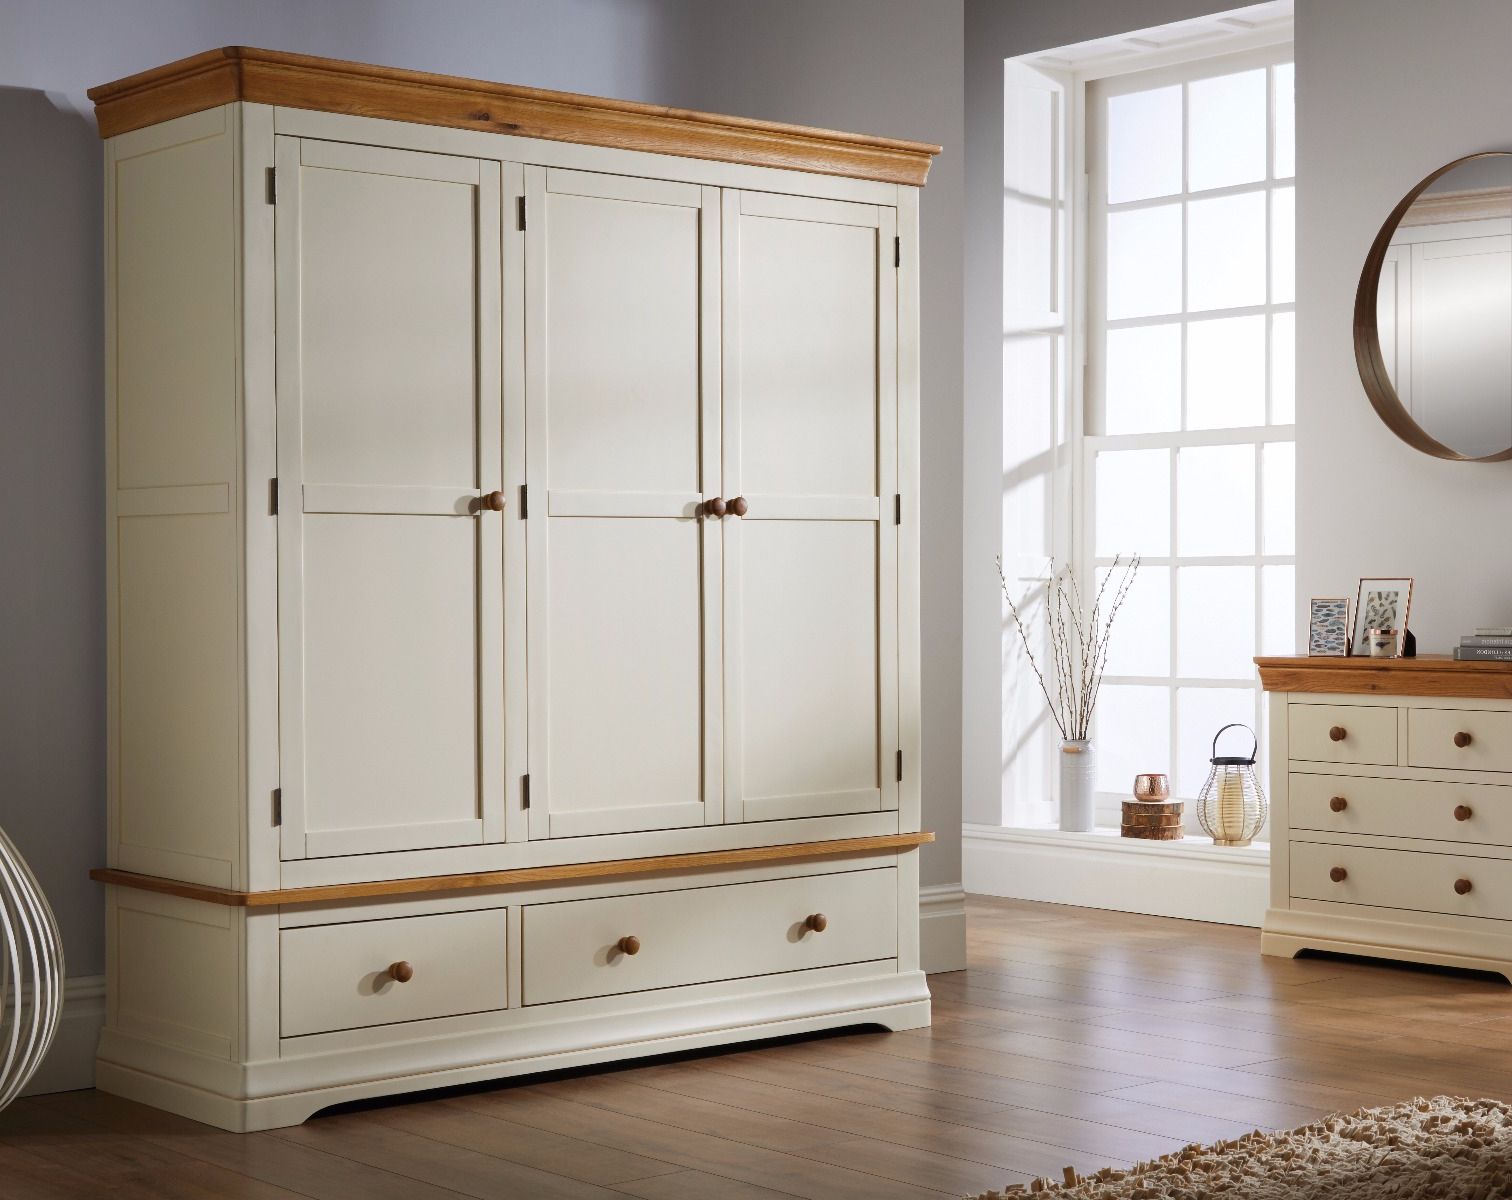 Farmhouse Cream Painted Triple Oak Wardrobe – Free Delivery | Top Furniture With Regard To Oak Wardrobes For Sale (Gallery 12 of 20)